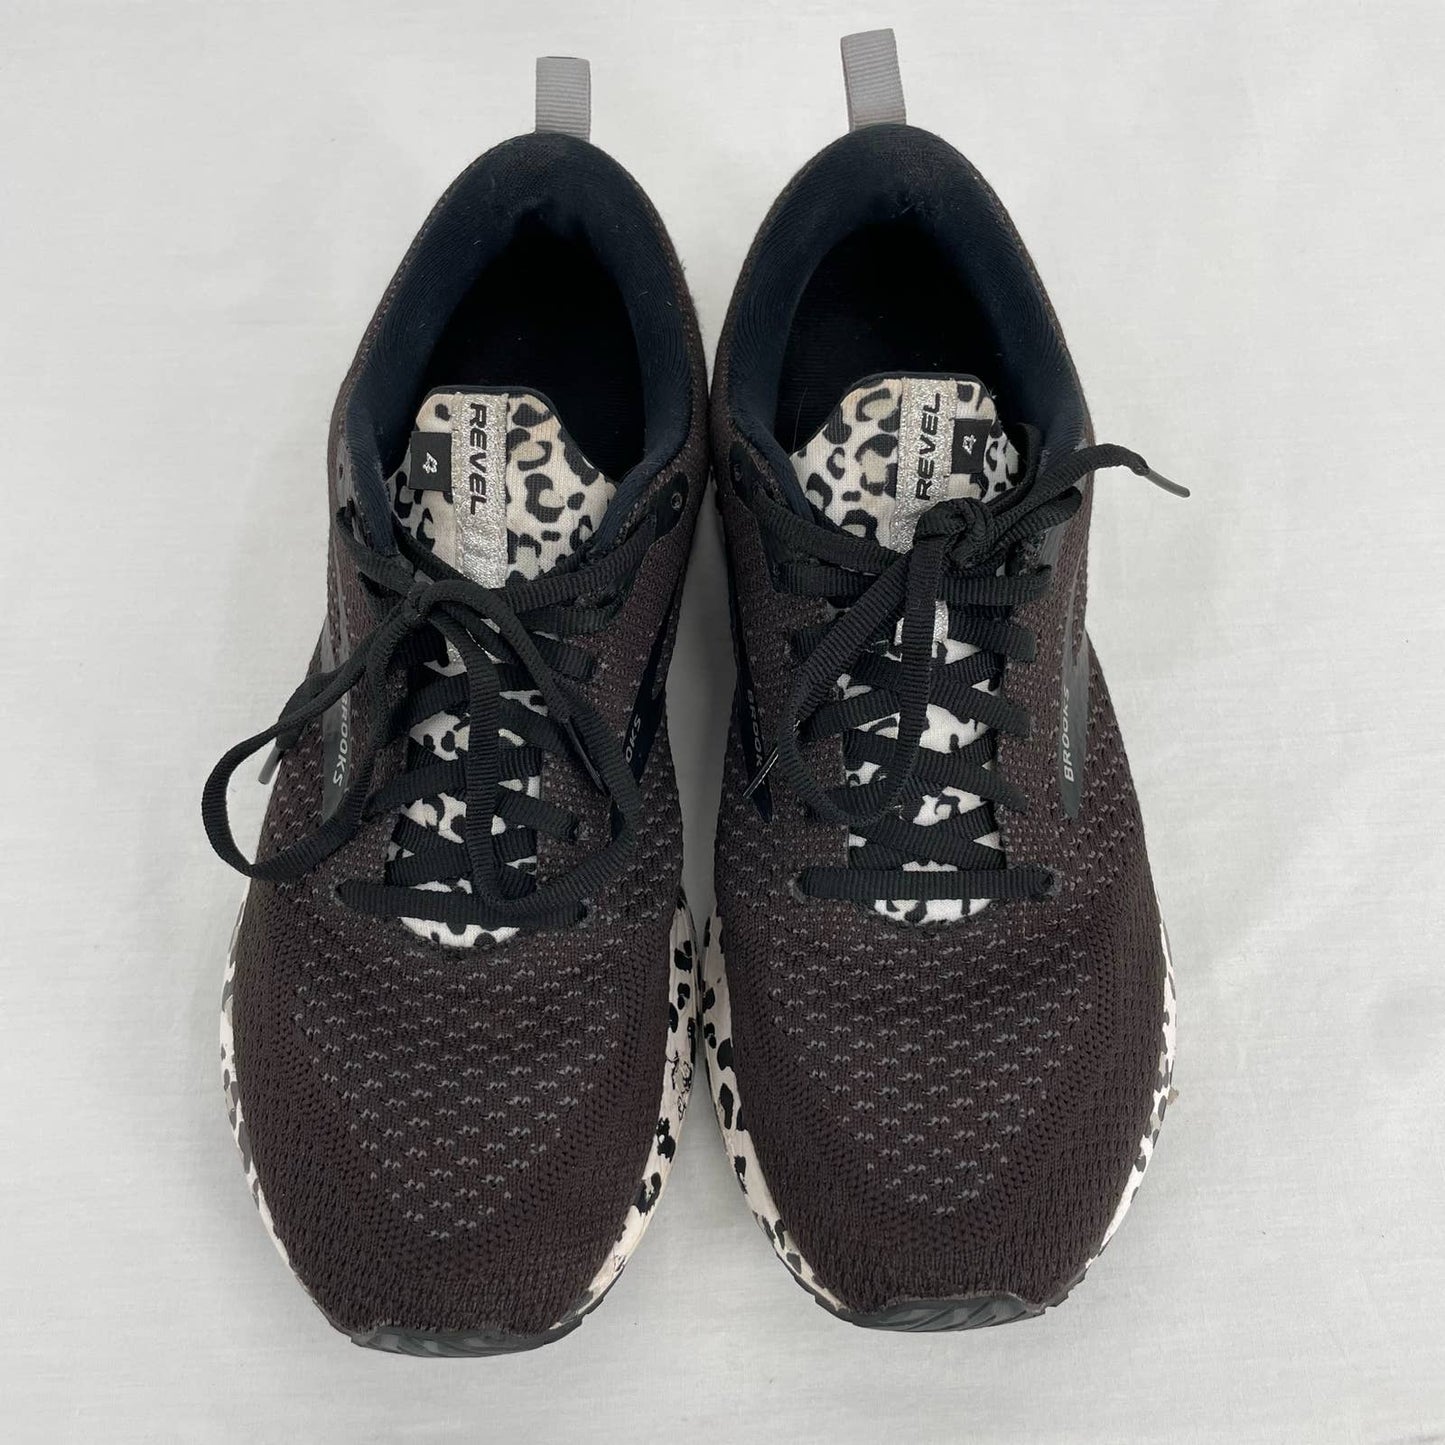 Brooks Revel 4 Running Shoes Wild Collection Snow Leopard Animal Print Black Size 10